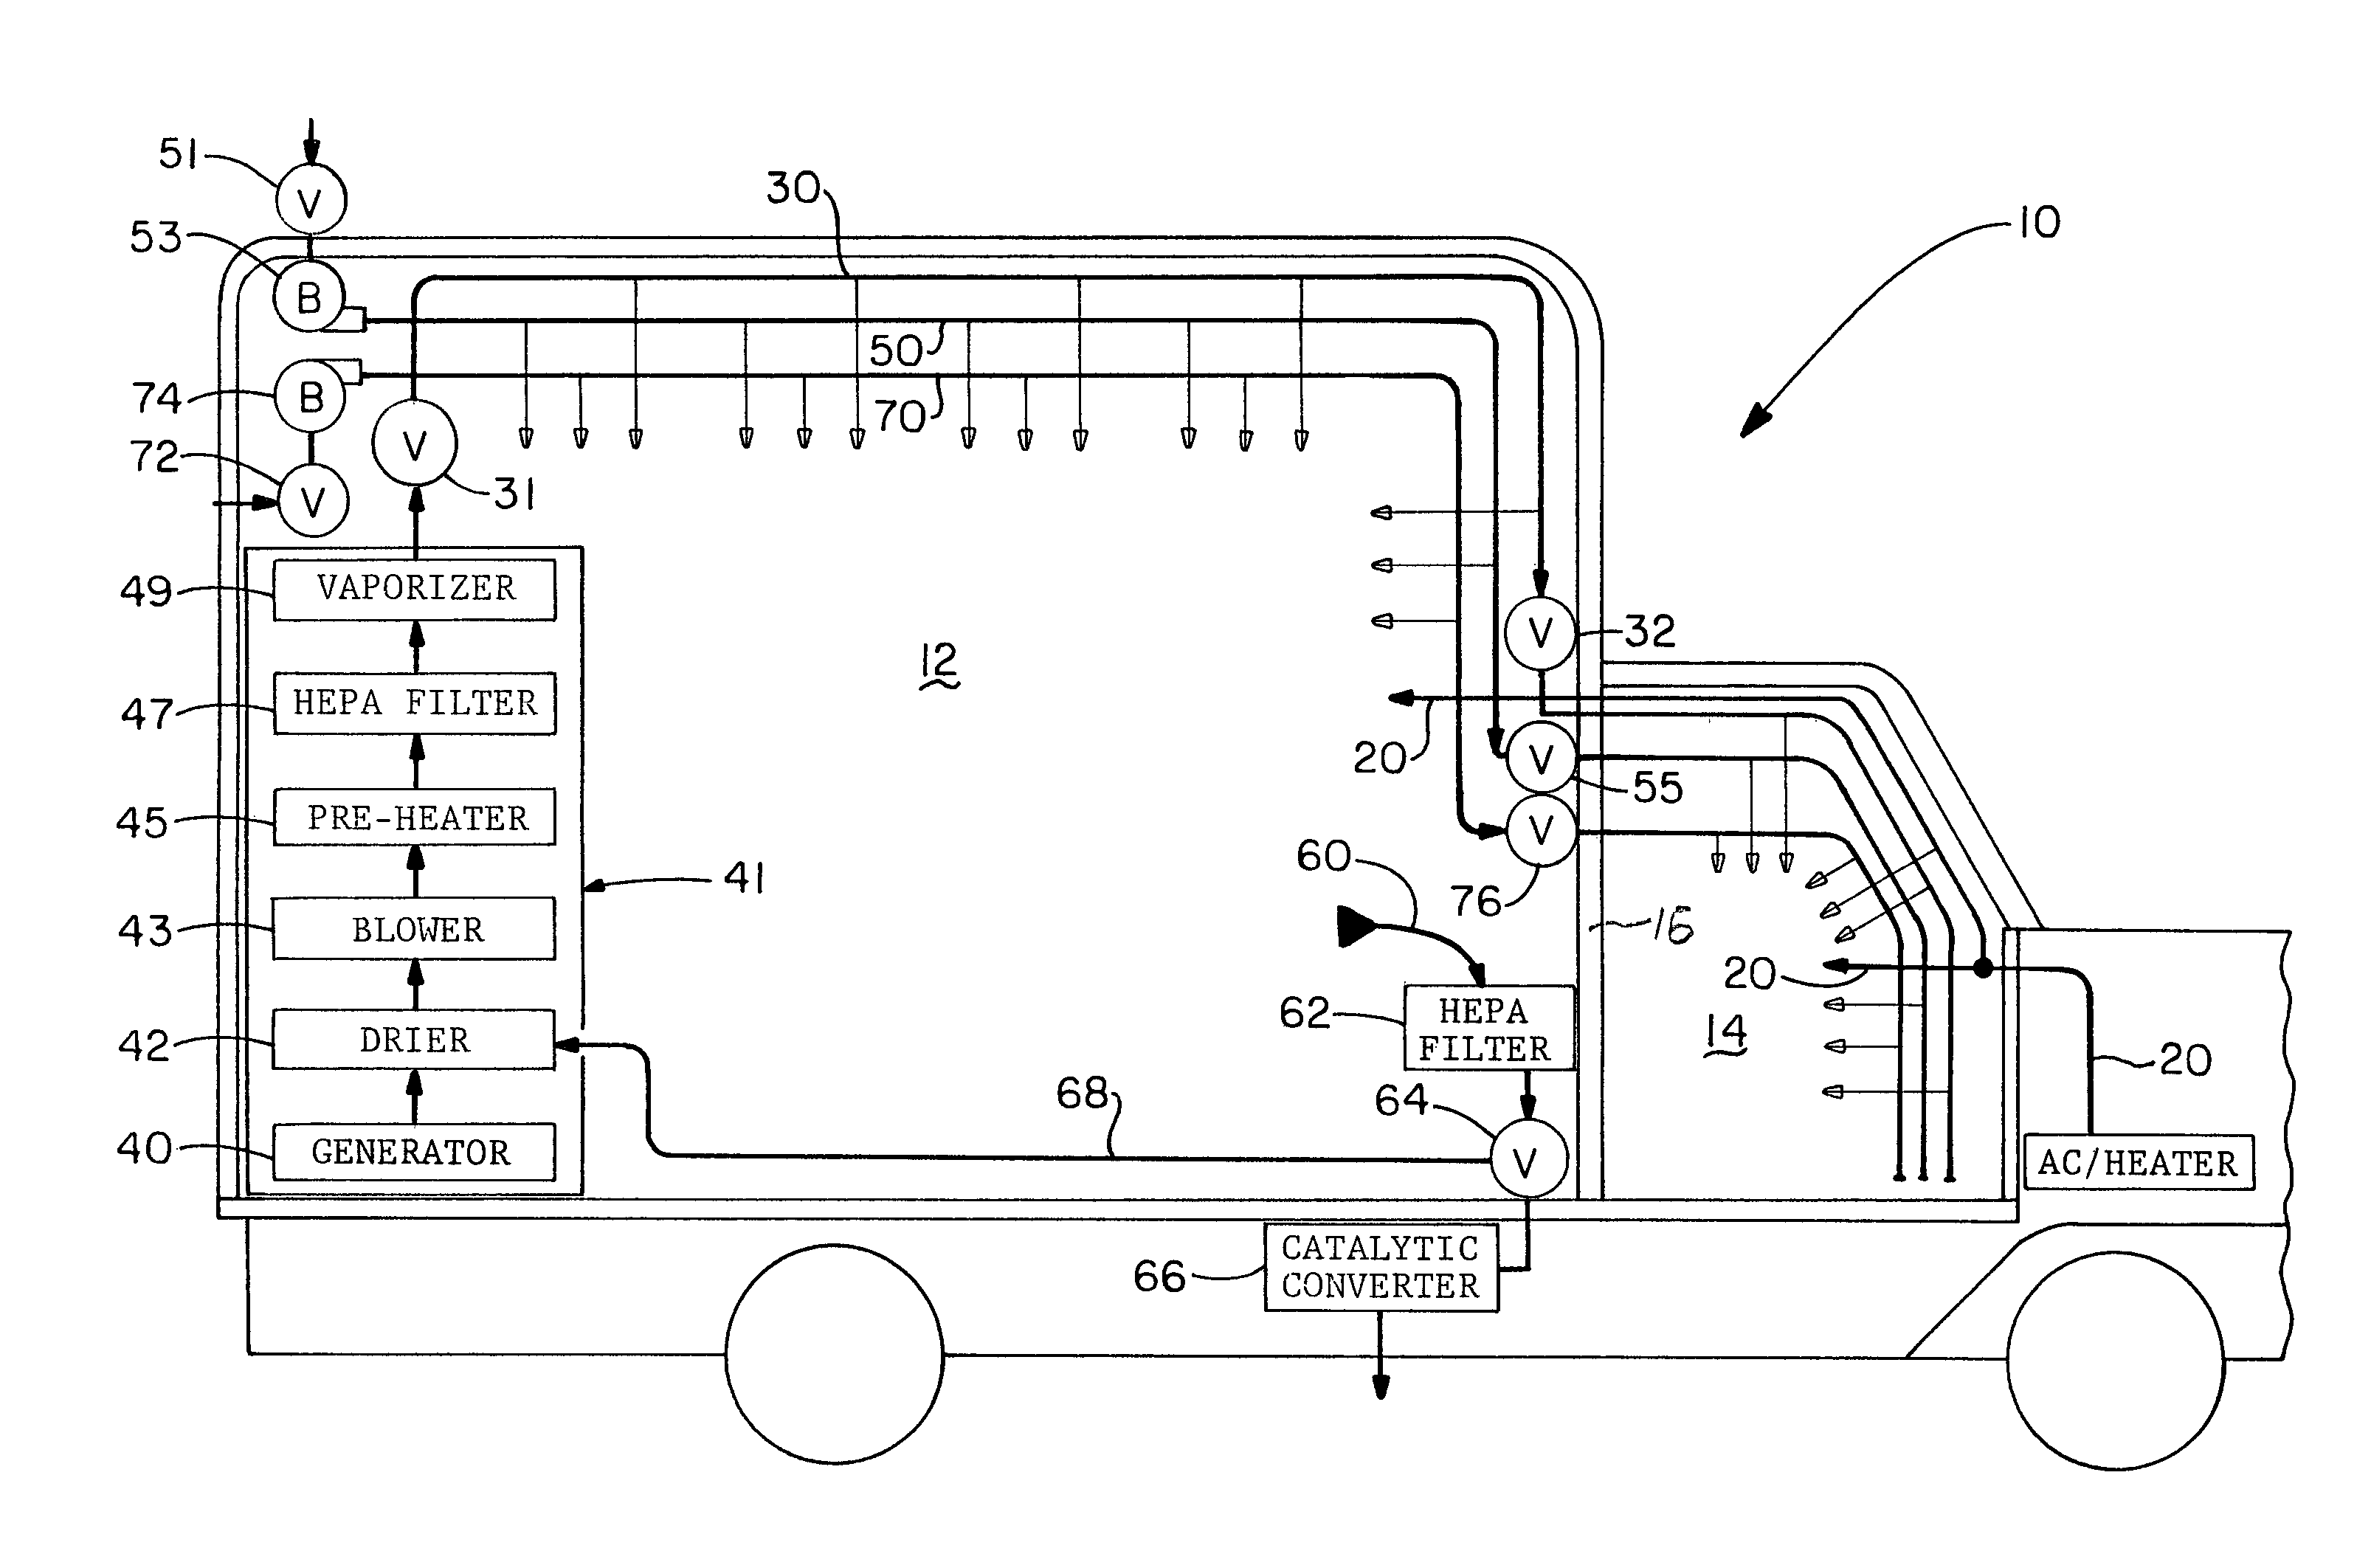 Integrated decontamination/aeration system for vehicles